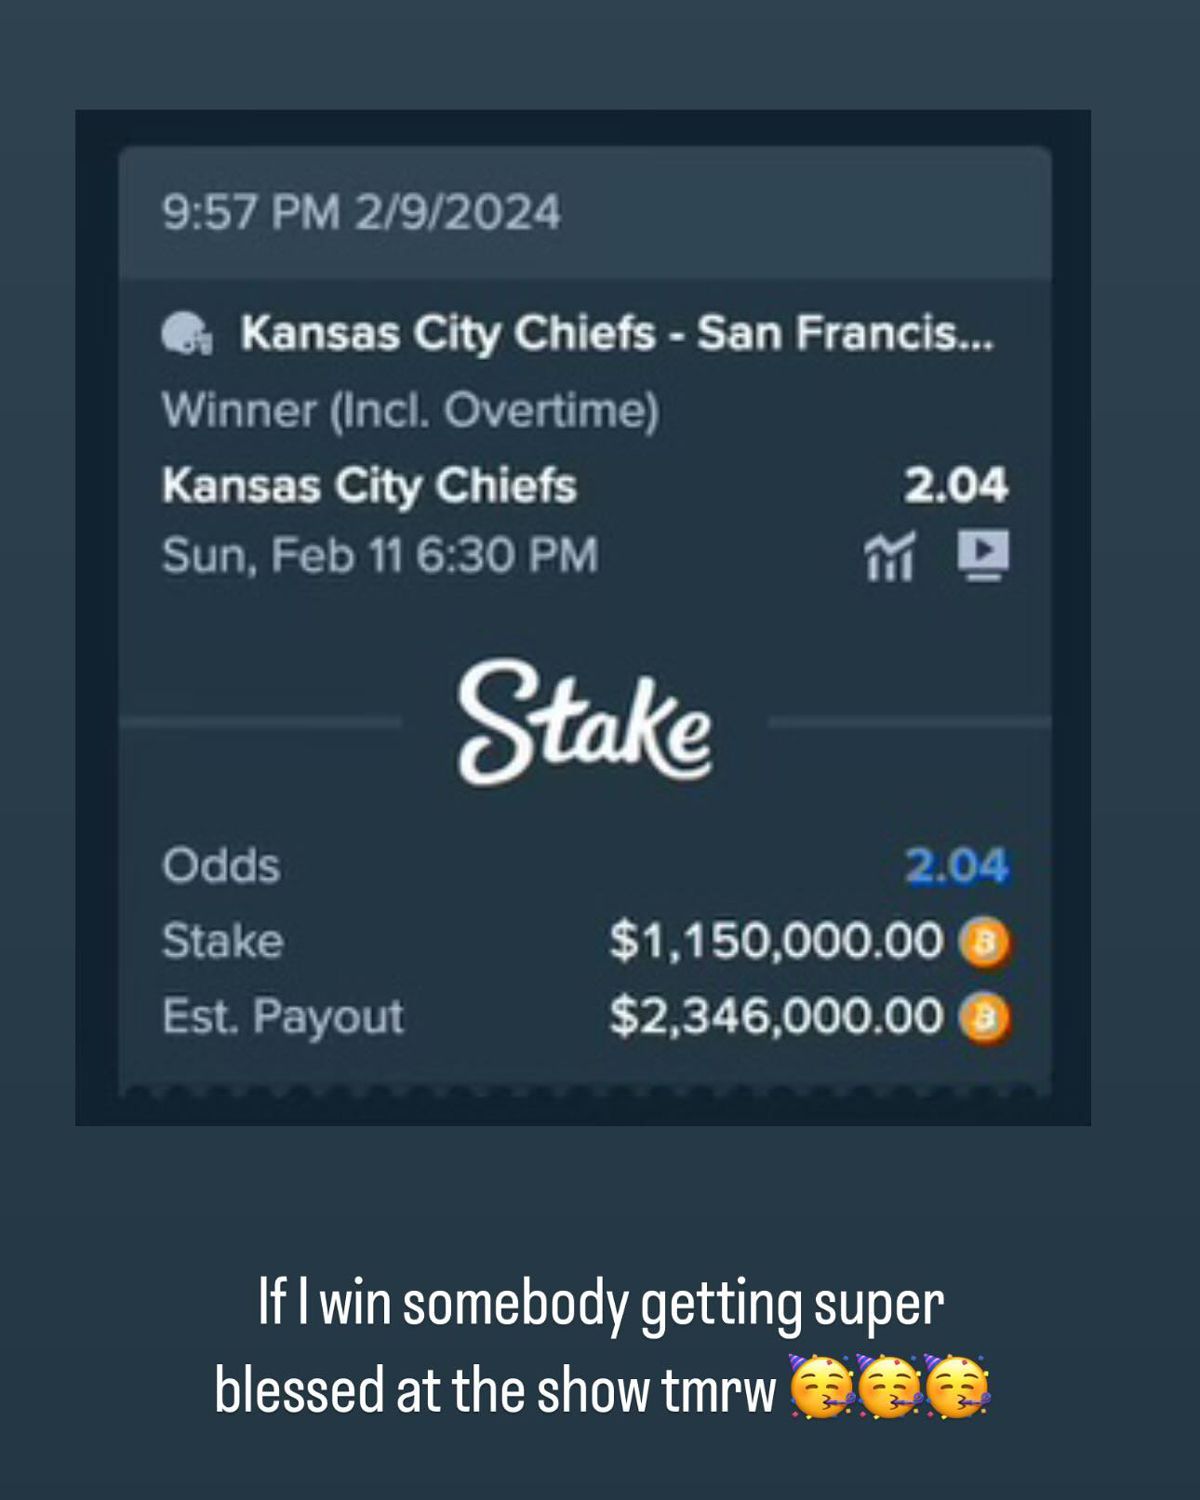 Photo: bet on chiefs to win super bowl